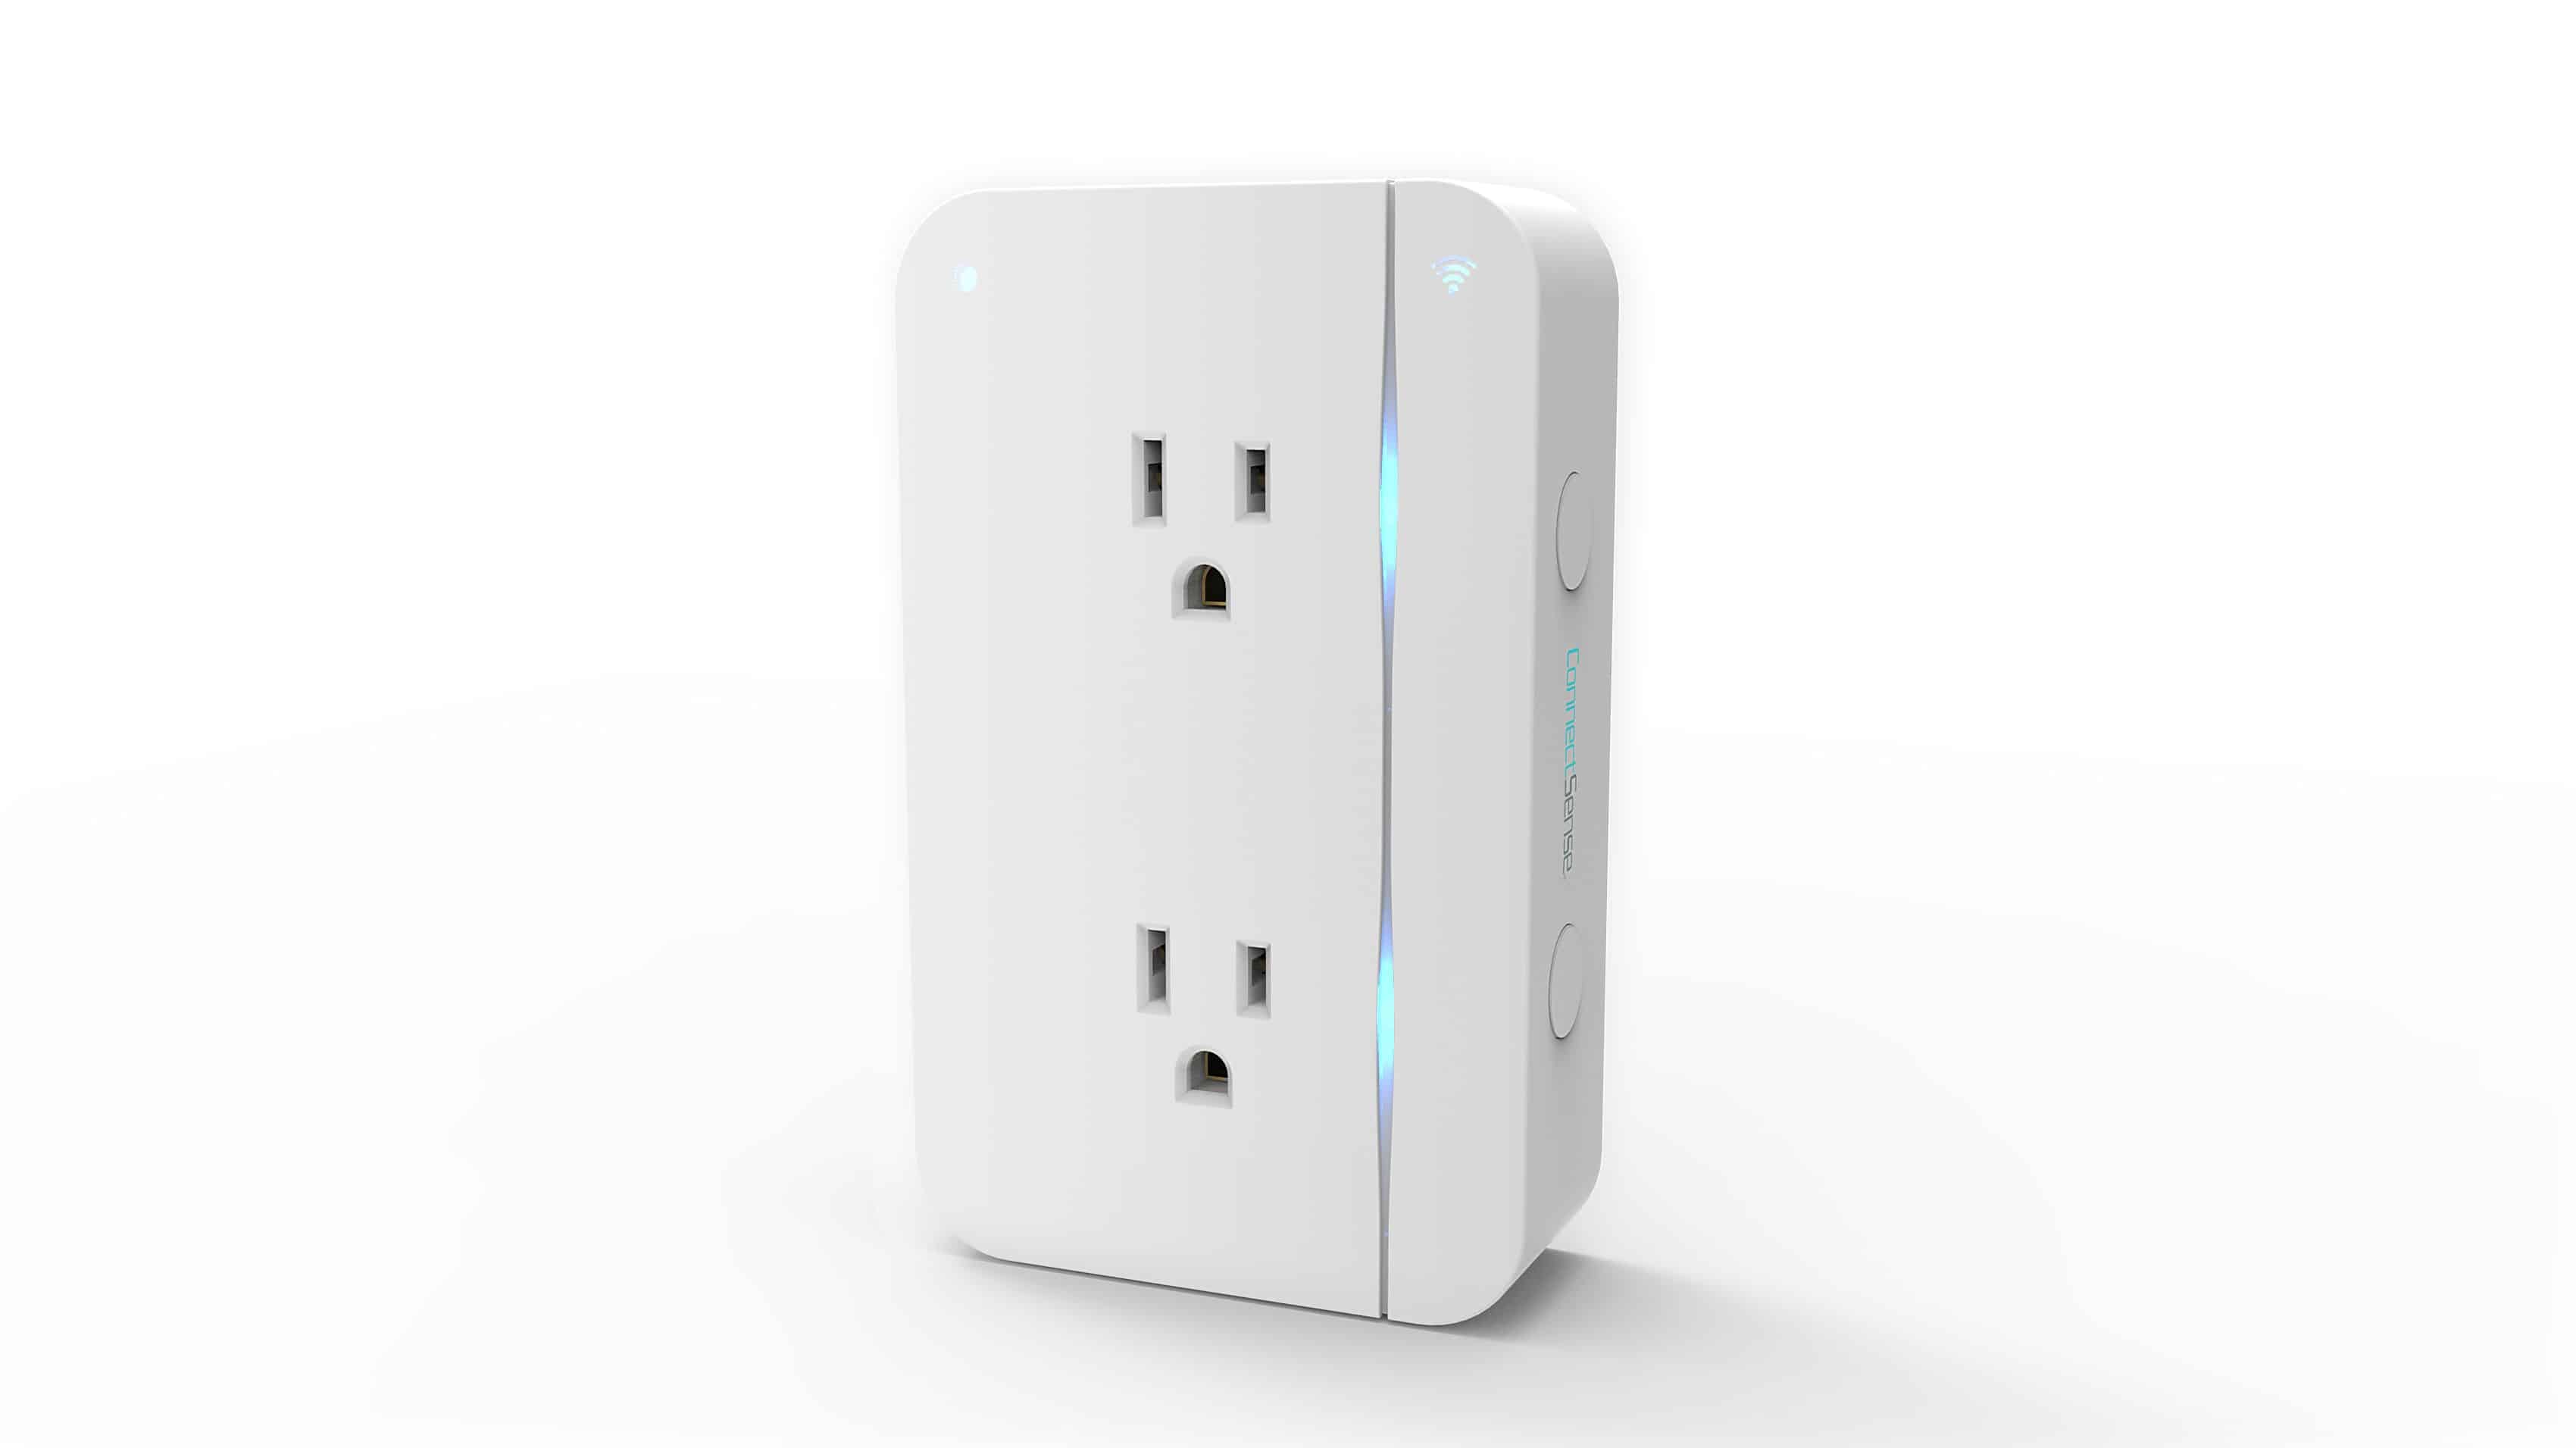 ConnectSense Smart Outlet2 with HomeKit offers two separately controlled smart outlets, plus a USB charging port.